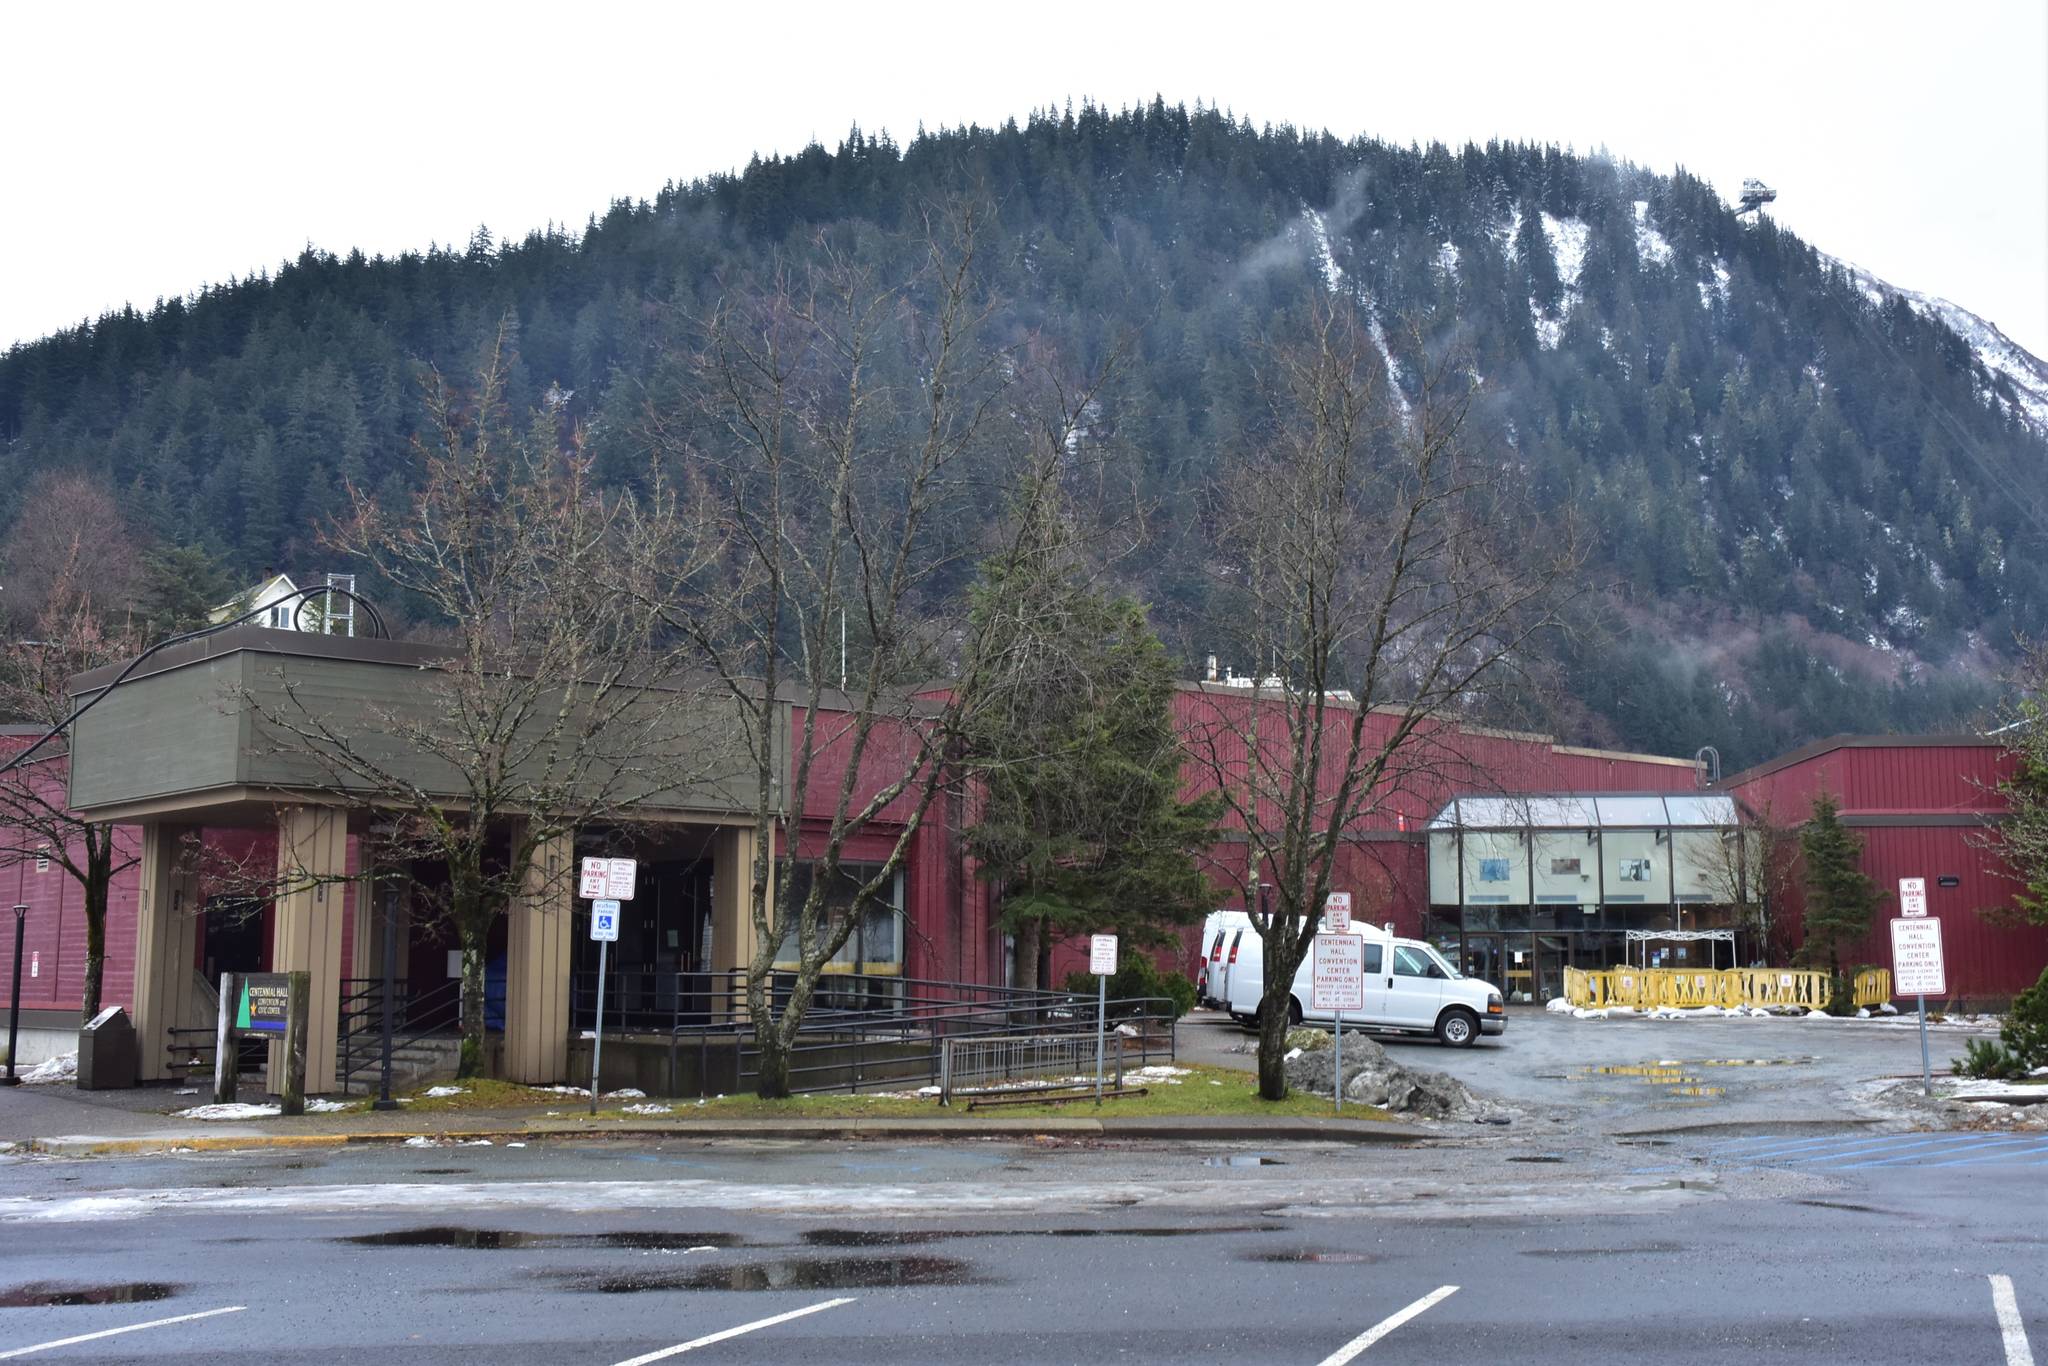 Centennial Hall, seen here on Tuesday, Nov. 24, is being used by the City and Borough of Juneau as an emergency facility during the coronavirus pandemic and will not host the annual Public Market which has taken place every weekend after Thanksgiving since 1983. (Peter Segall / Juneau Empire)